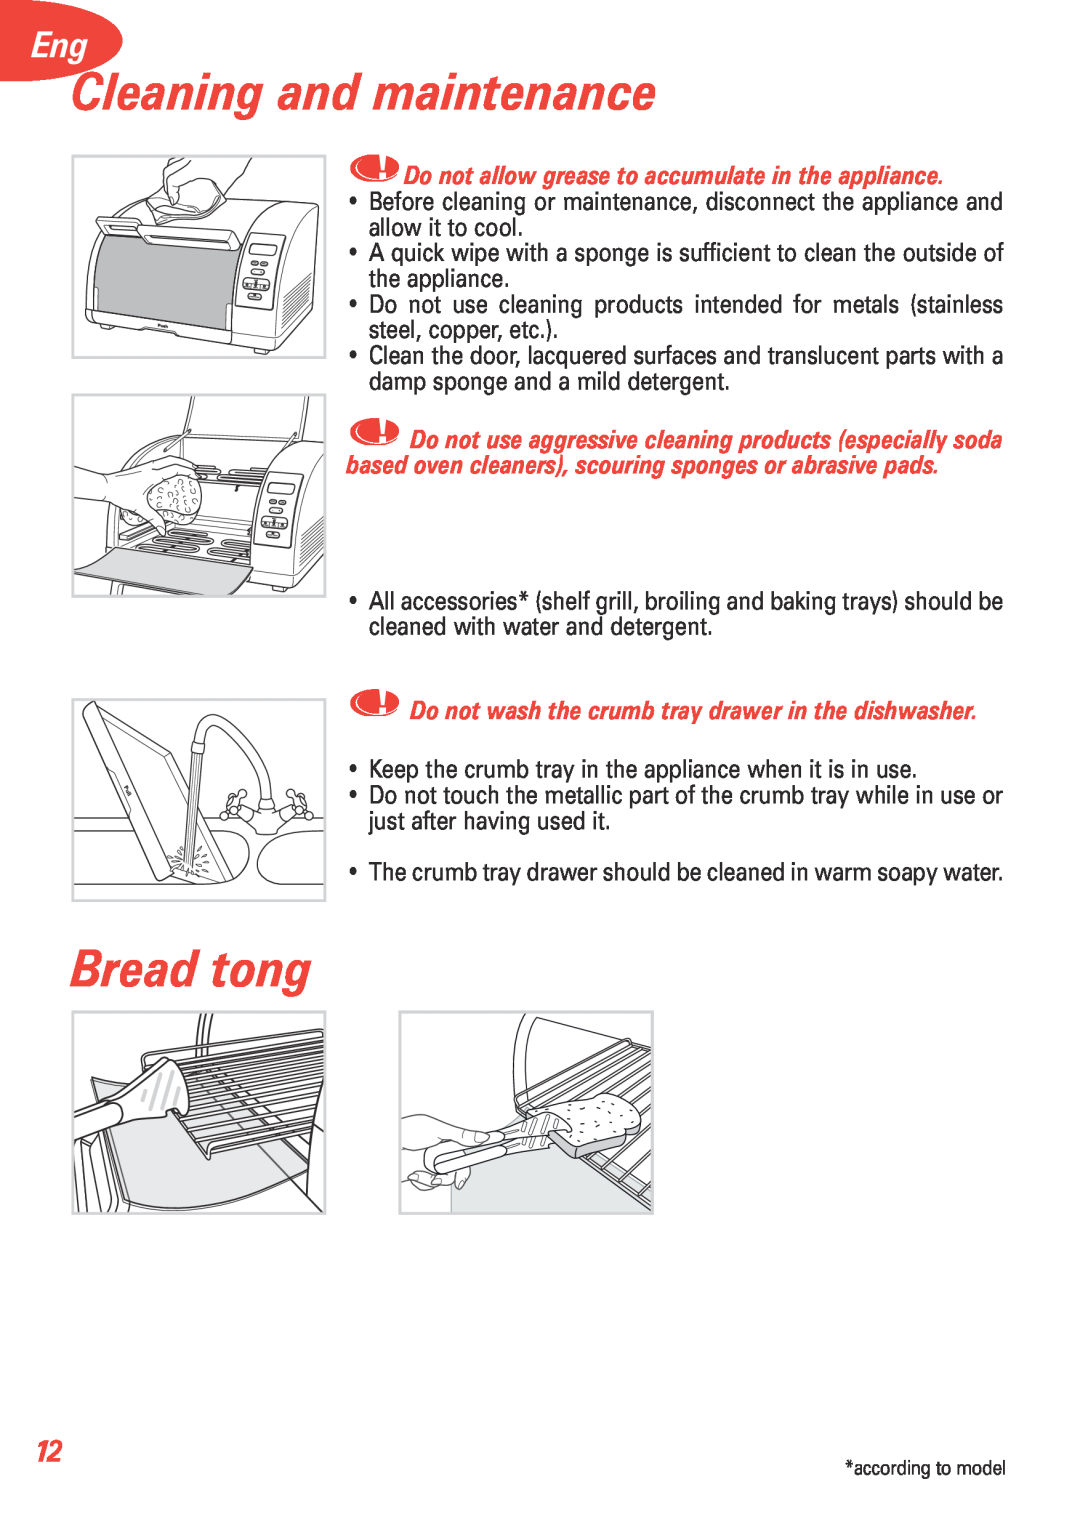 T-Fal 5252 manual Cleaning and maintenance, Bread tong 